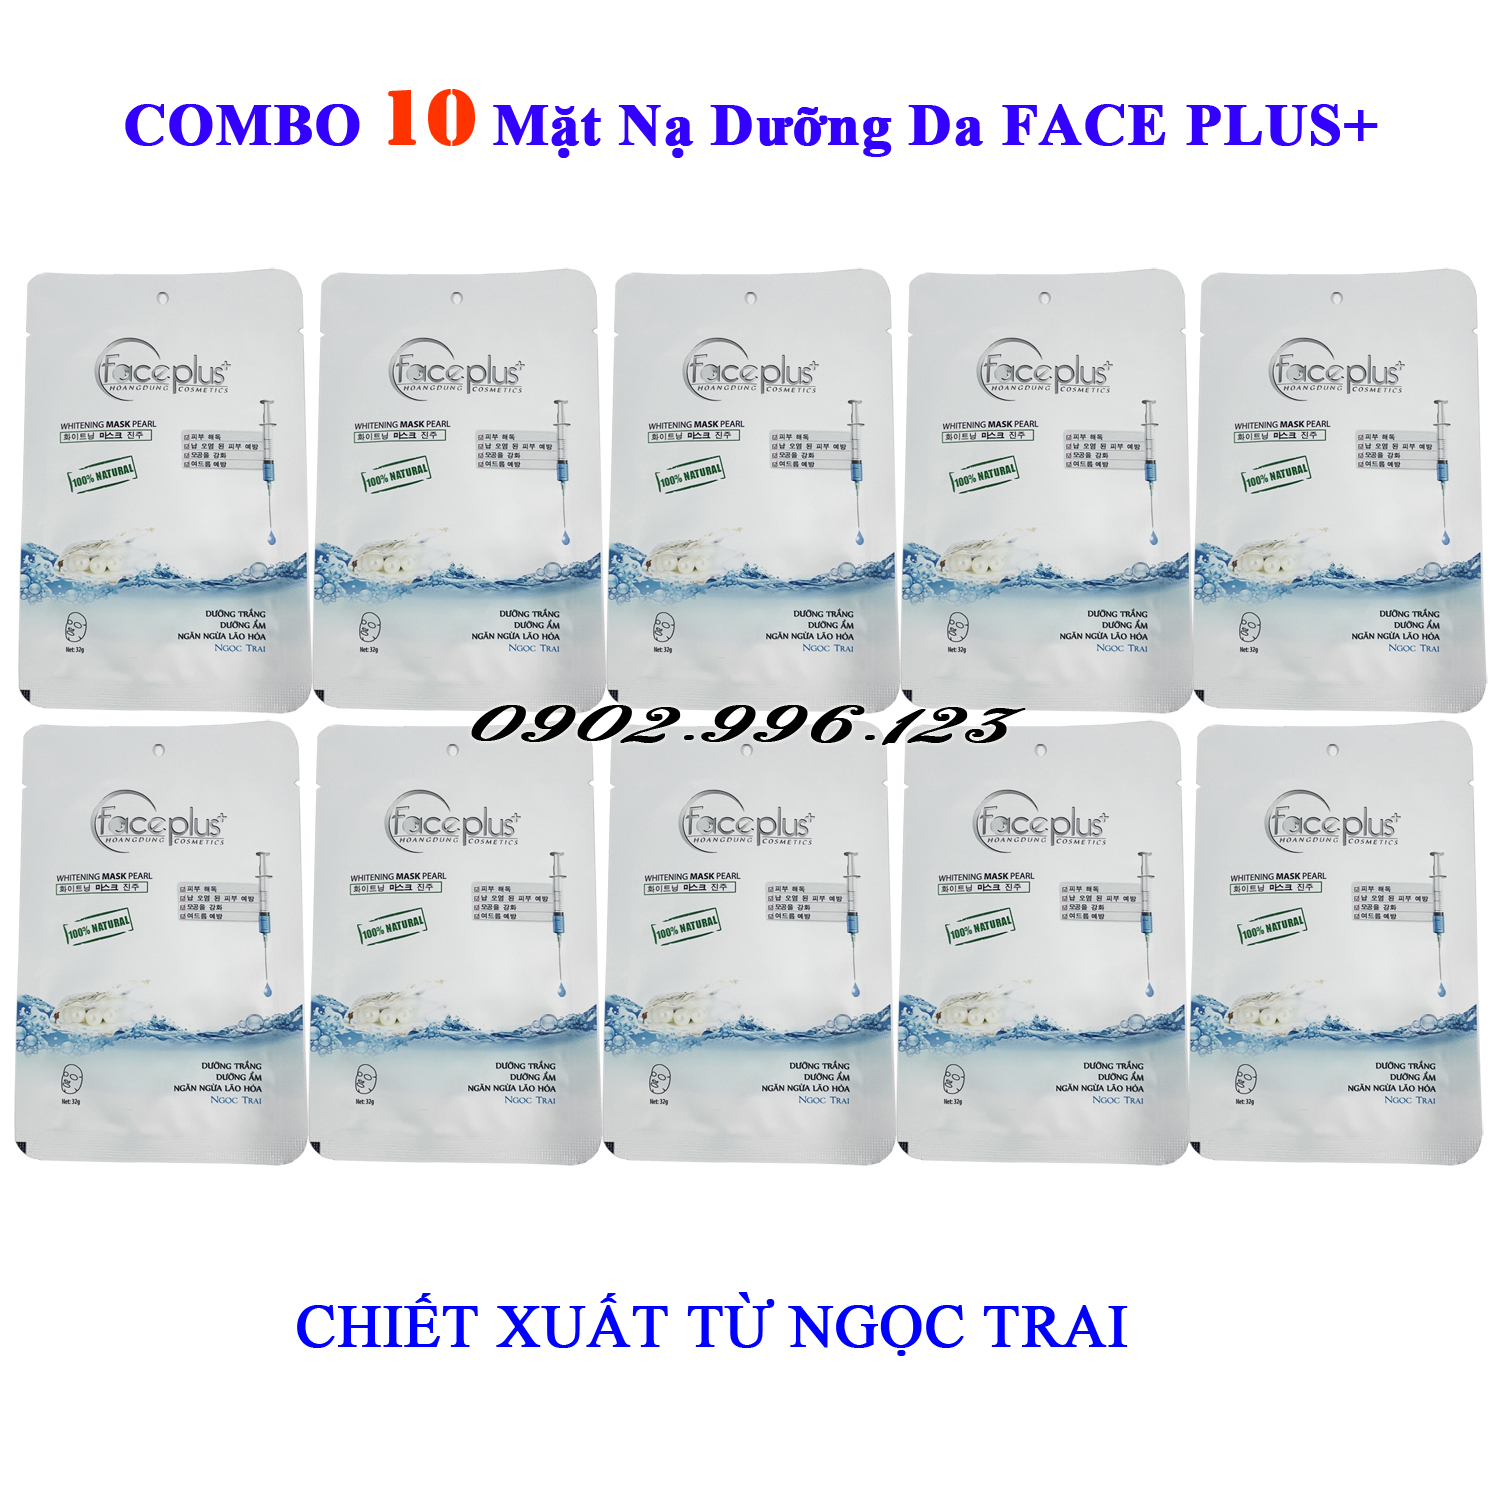 Combo 10 Mặt nạ chiết xuất từ Ngọc Trai FACE PLUS